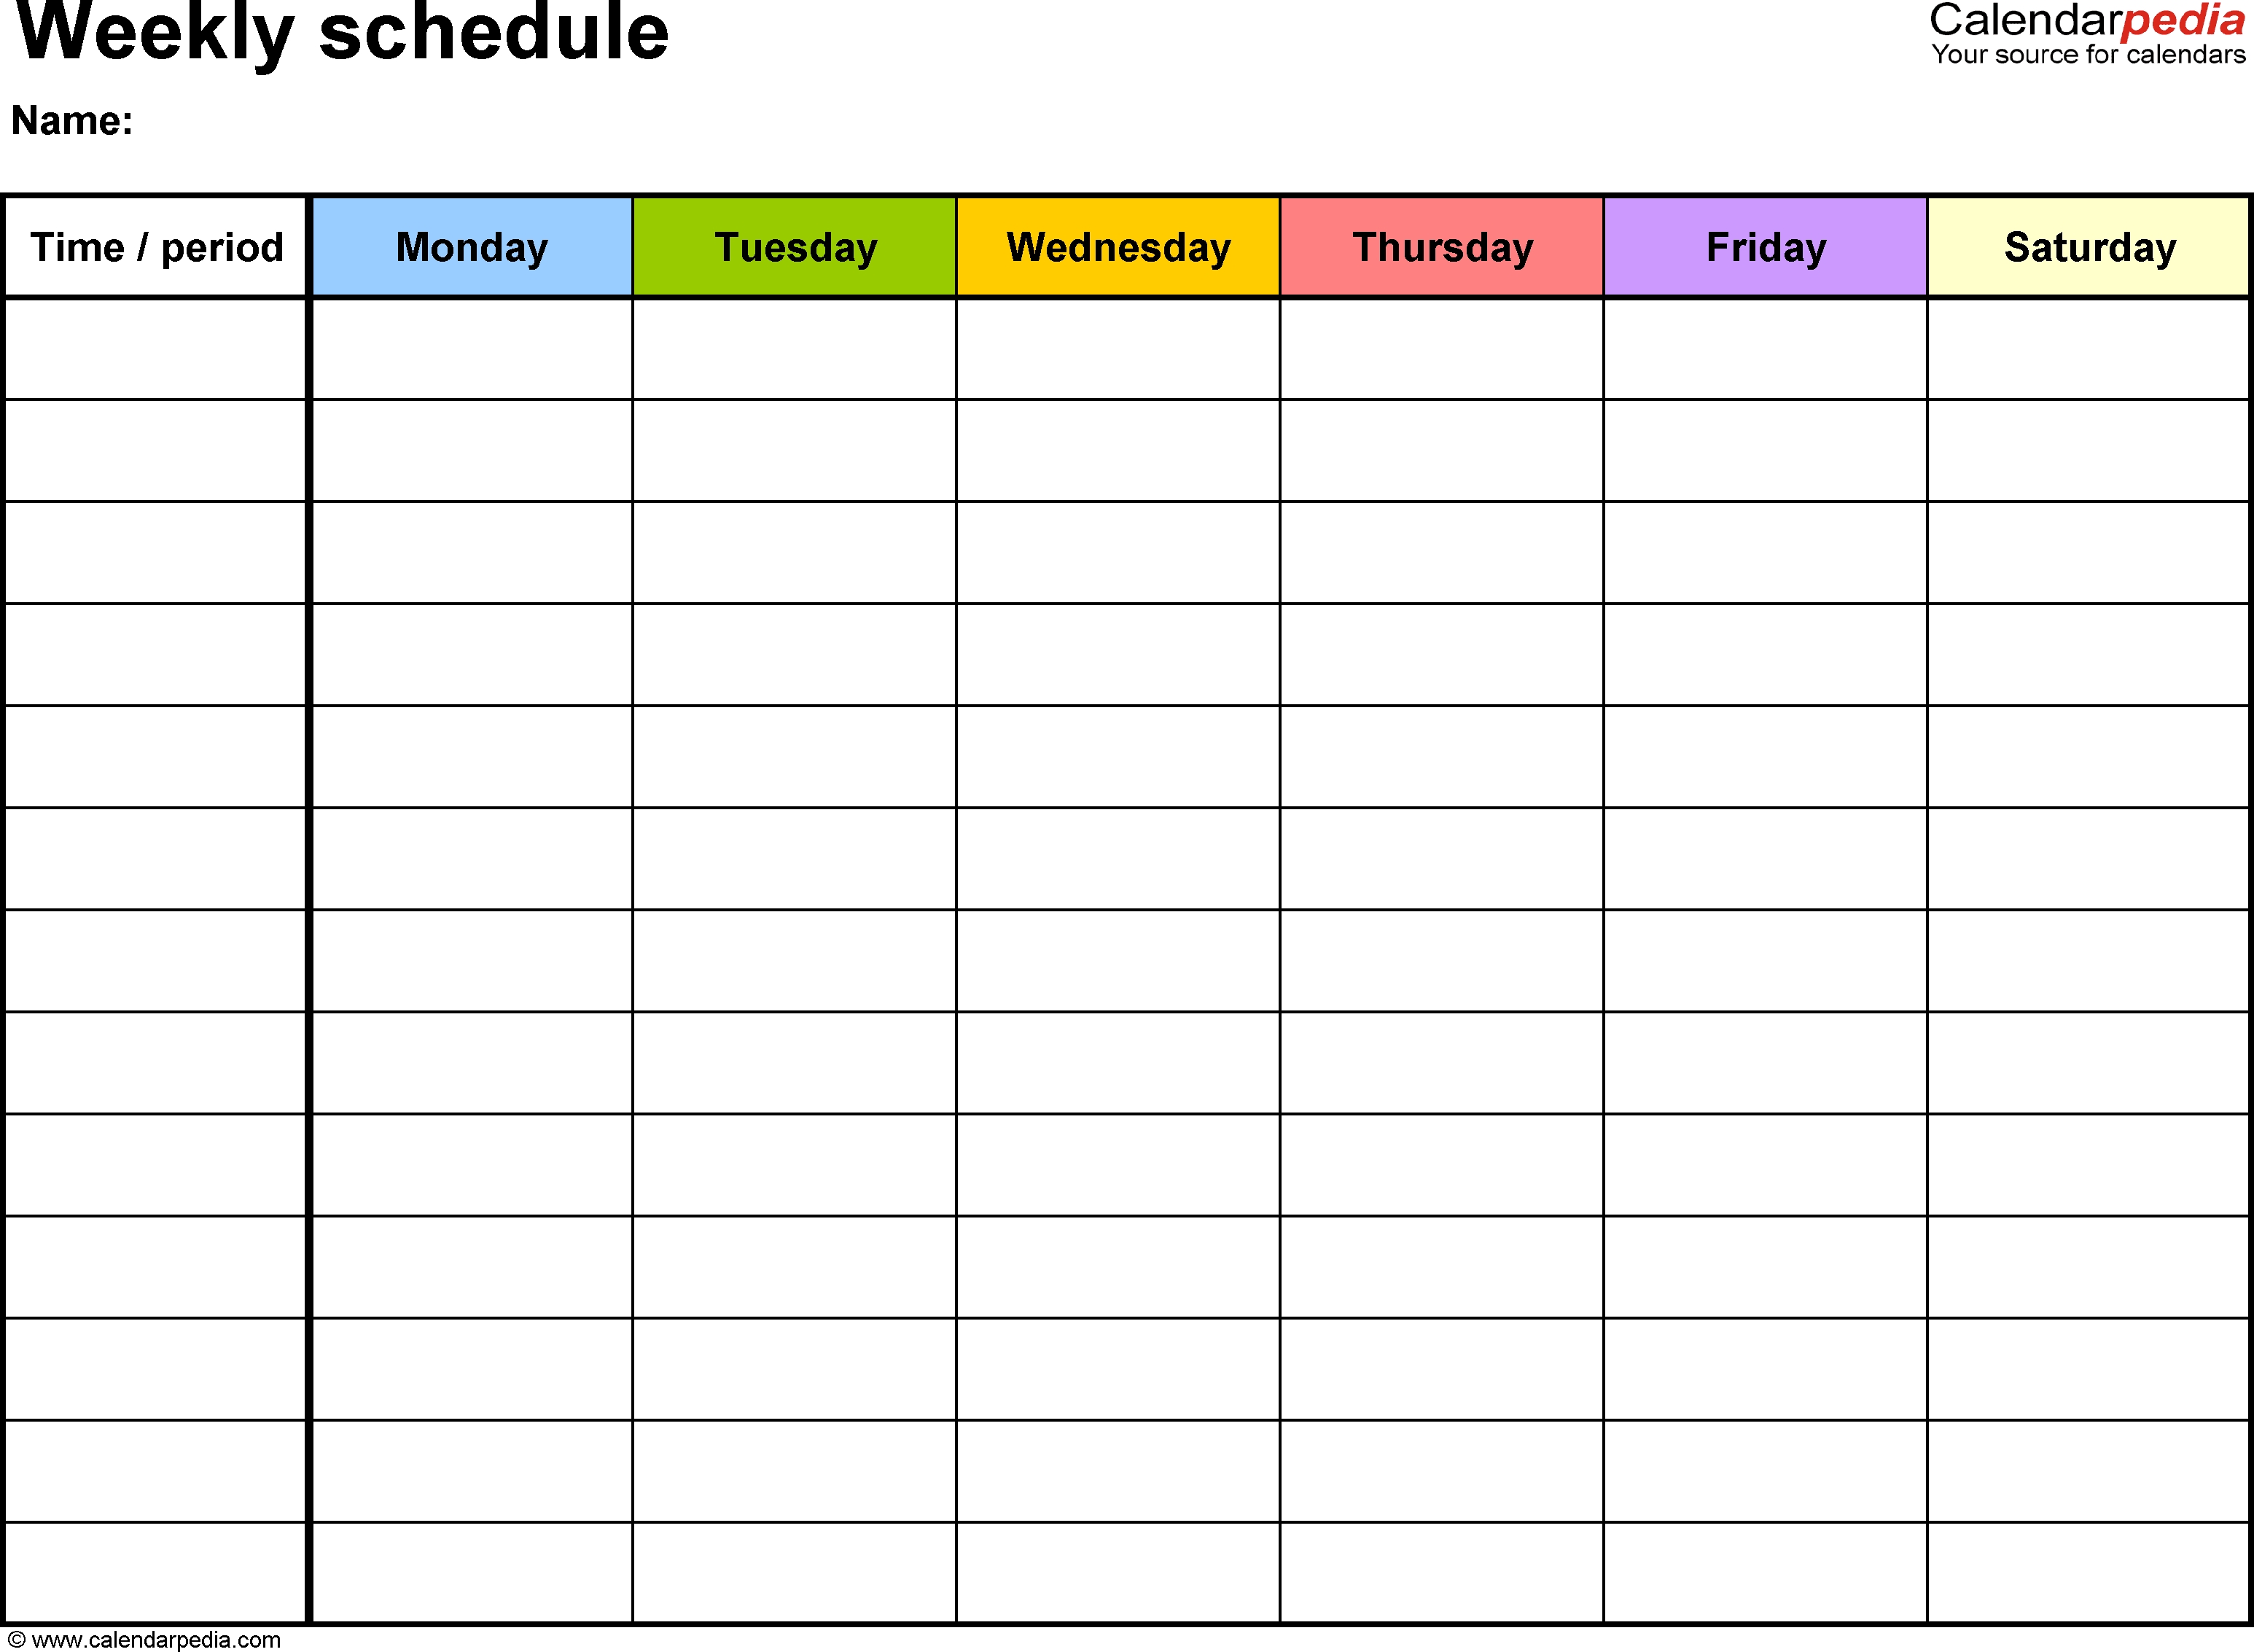 Free Weekly Schedule Templates For Word - 18 Templates pertaining to 6 Week Printable Blank Calendar